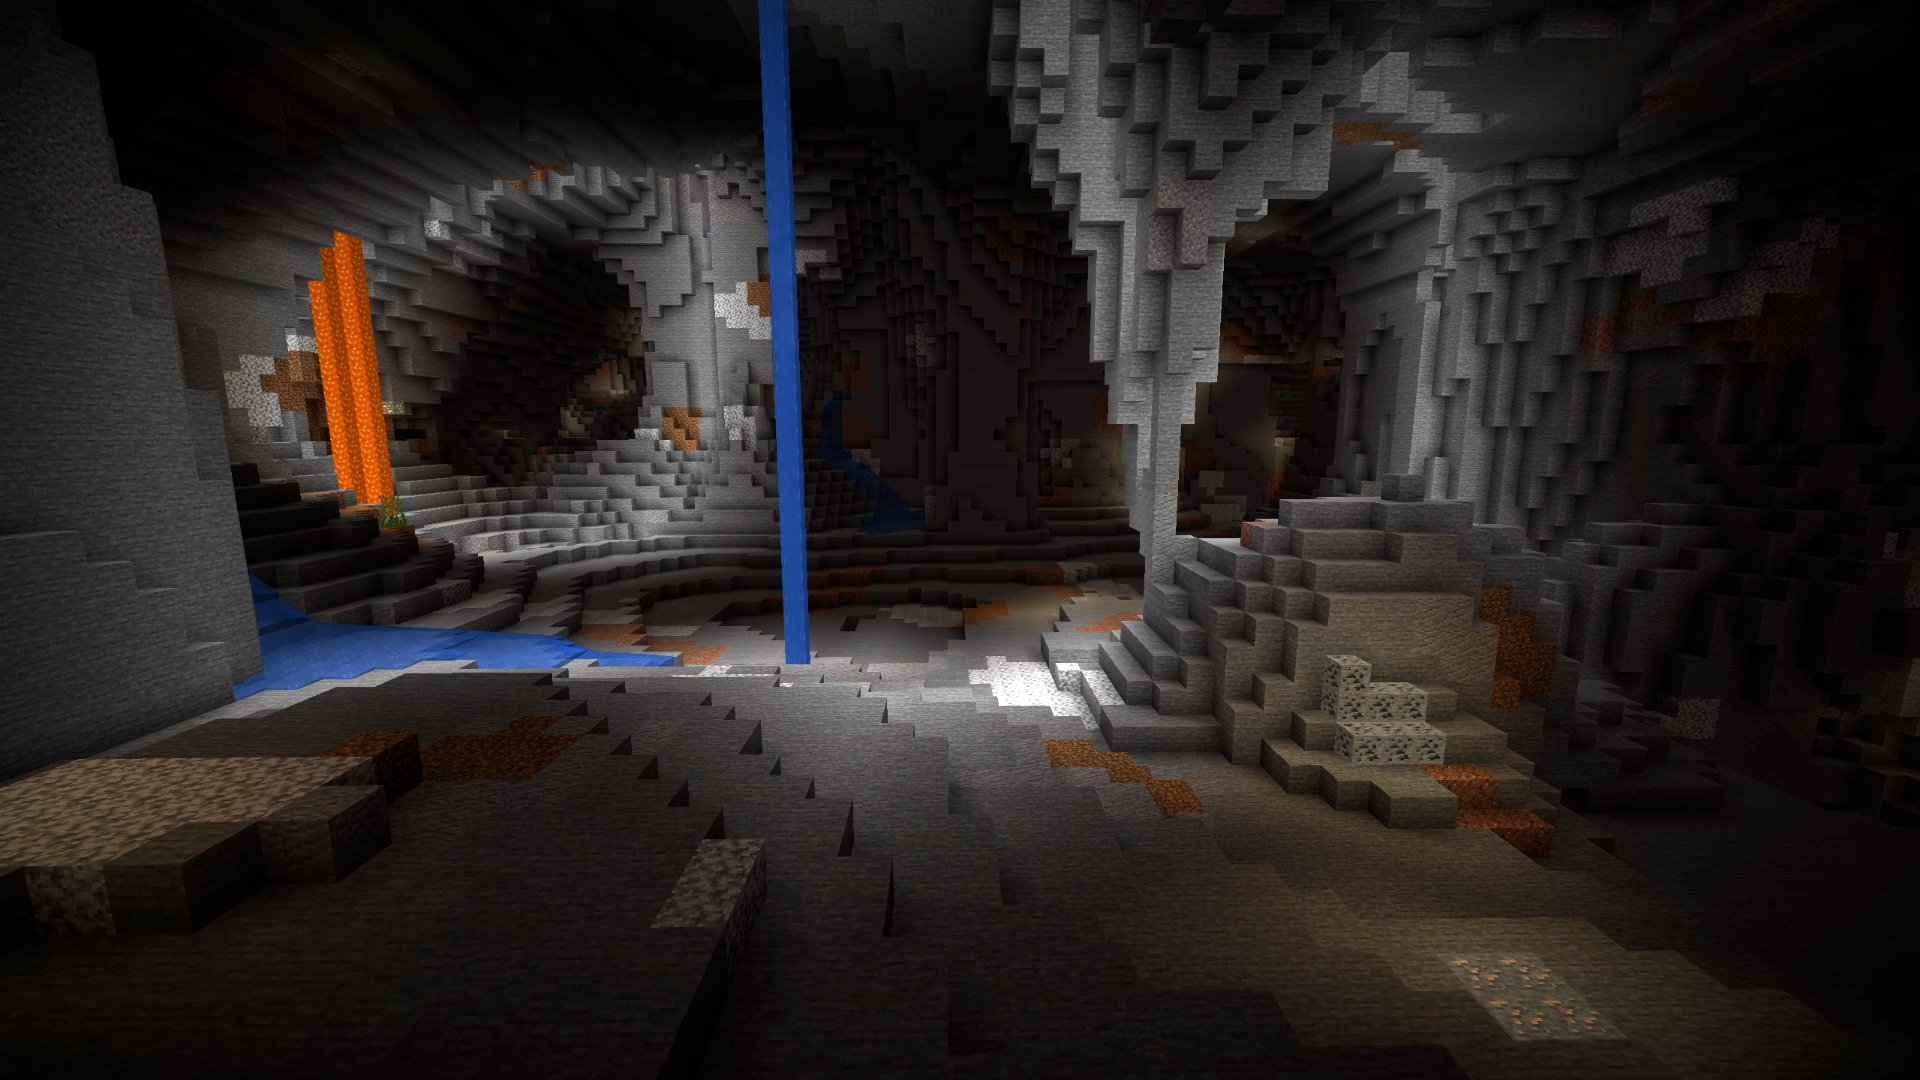 https://www.windowscentral.com/sites/wpcentral.com/files/styles/larger/public/field/image/2020/10/minecraft-caves-and-cliffs-update-cave-generation-01.jpg